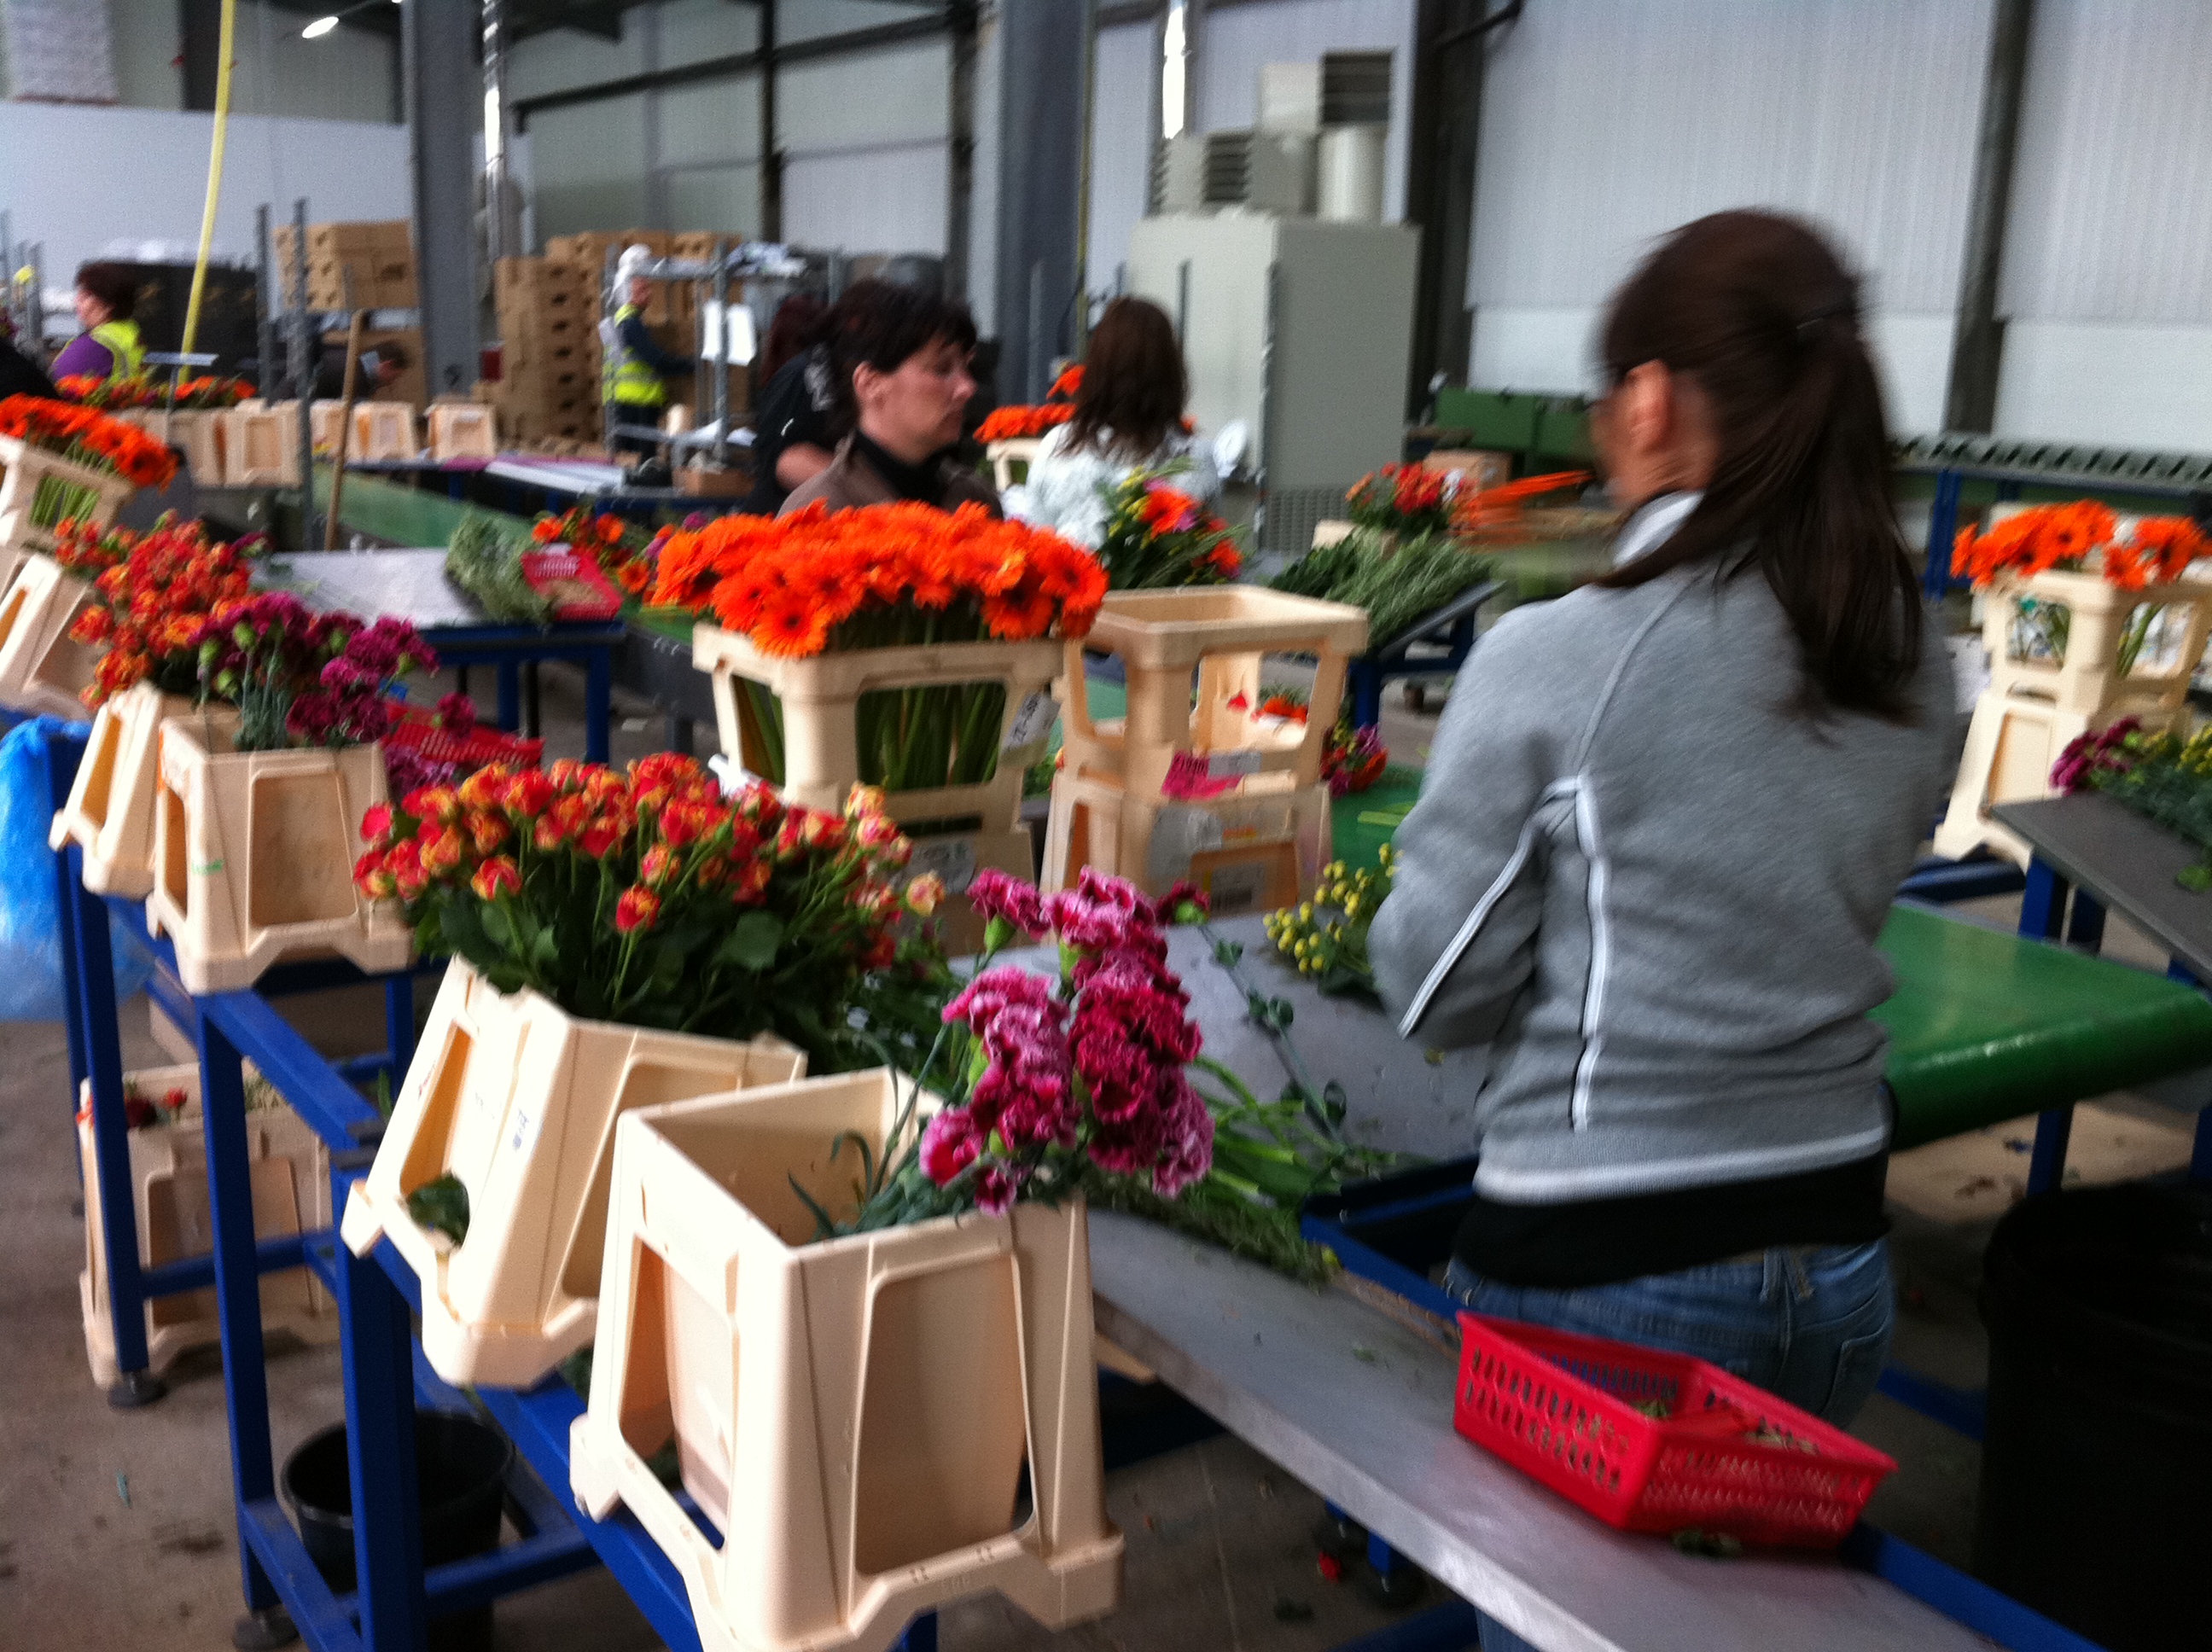 Flower packing tables and conveyor